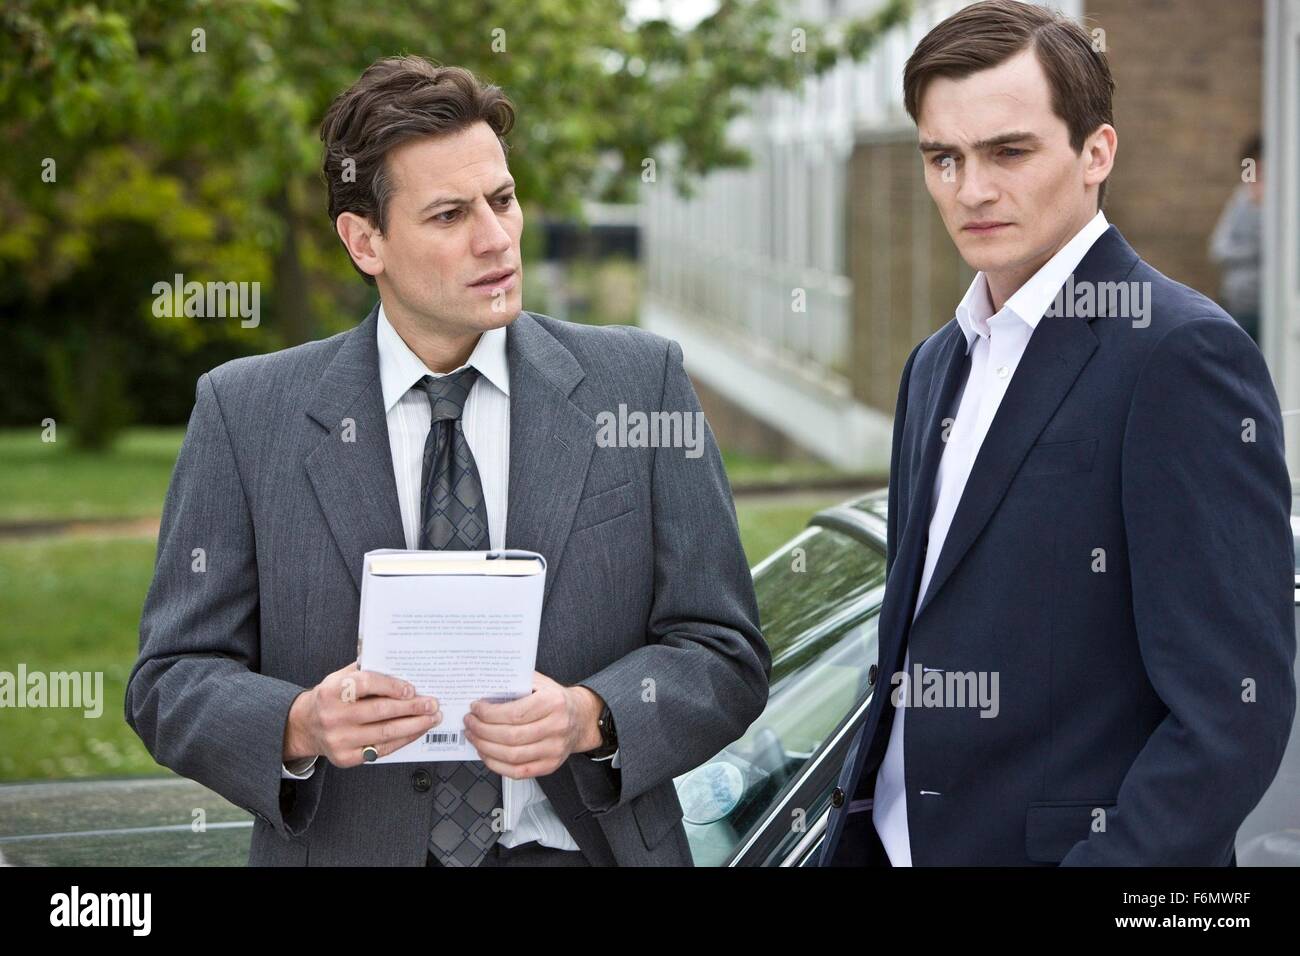 RELEASE DATE: 17 September 2010. TITLE: The Kid. STUDIO: Tin House Films. PLOT: About Kevin Lewis who grew up in poverty but survived to make a better life for himself and his family. PICTURED: IOAN GRUFFUDD as Colin Smith and RUPERT FRIEND as Kevin Lewis. Stock Photo